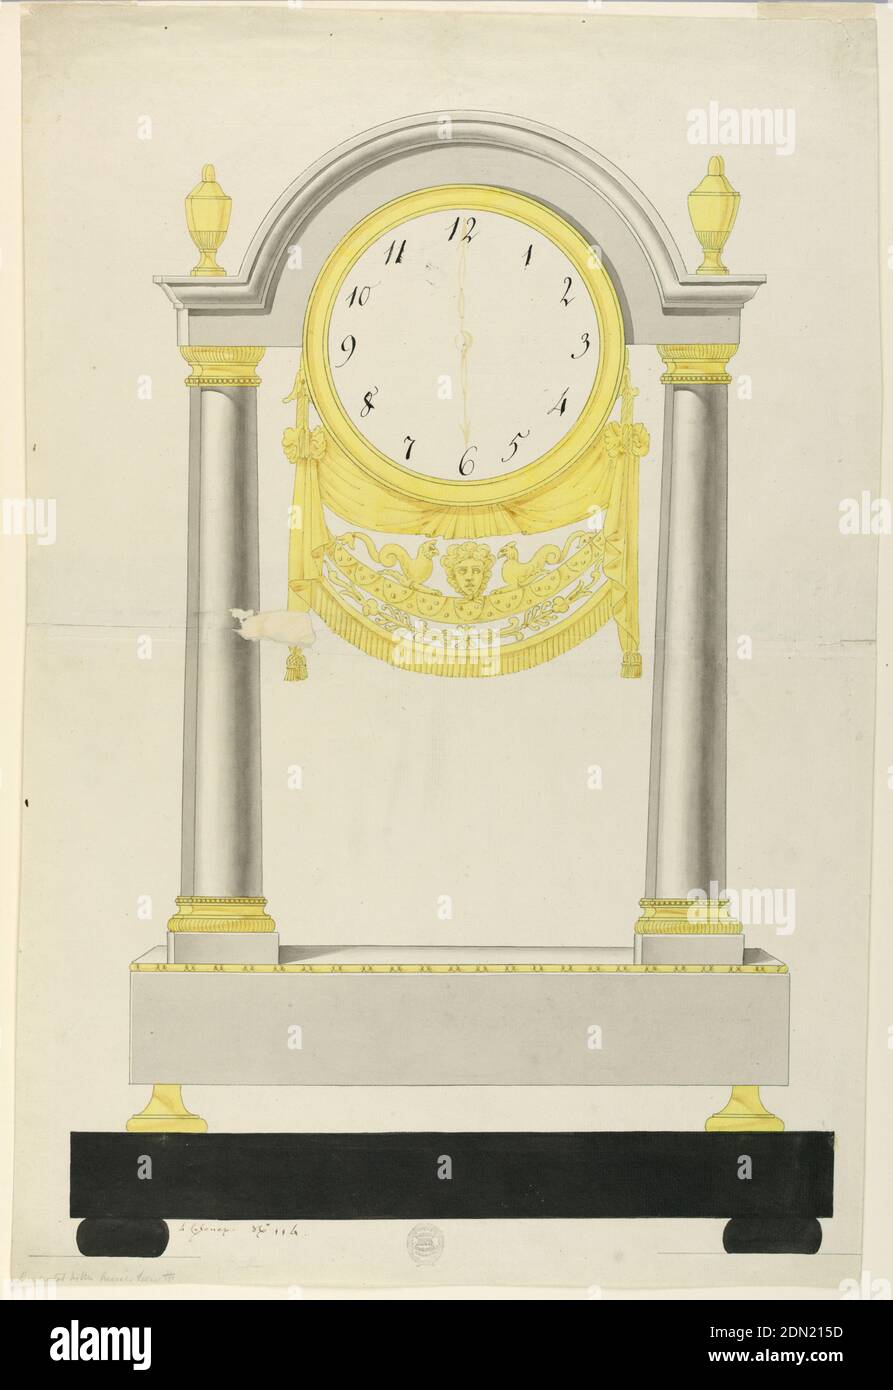 Design for Clock, Lefebvre Manufactory, Tournai, Graphite, pen and brown ink, brush and yellow, grey, black and brown-red watercolor on cream laid paper, Dial suspended underneath classic arch, supported by four columns, a vase atop each column. Drapery and a head framed by two griffins hang below the dial. An integrated base with tapered knobs rests upon a black base with cushion feet., Inscription:, Pen and brown ink: 4 Colones; No. 114. /, Graphite: Presented to the Misses Hewitt, Lower Center: Cooper Union stamp #457D, Belgium, 1800–1825, timepieces & measuring devices, Drawing Stock Photo